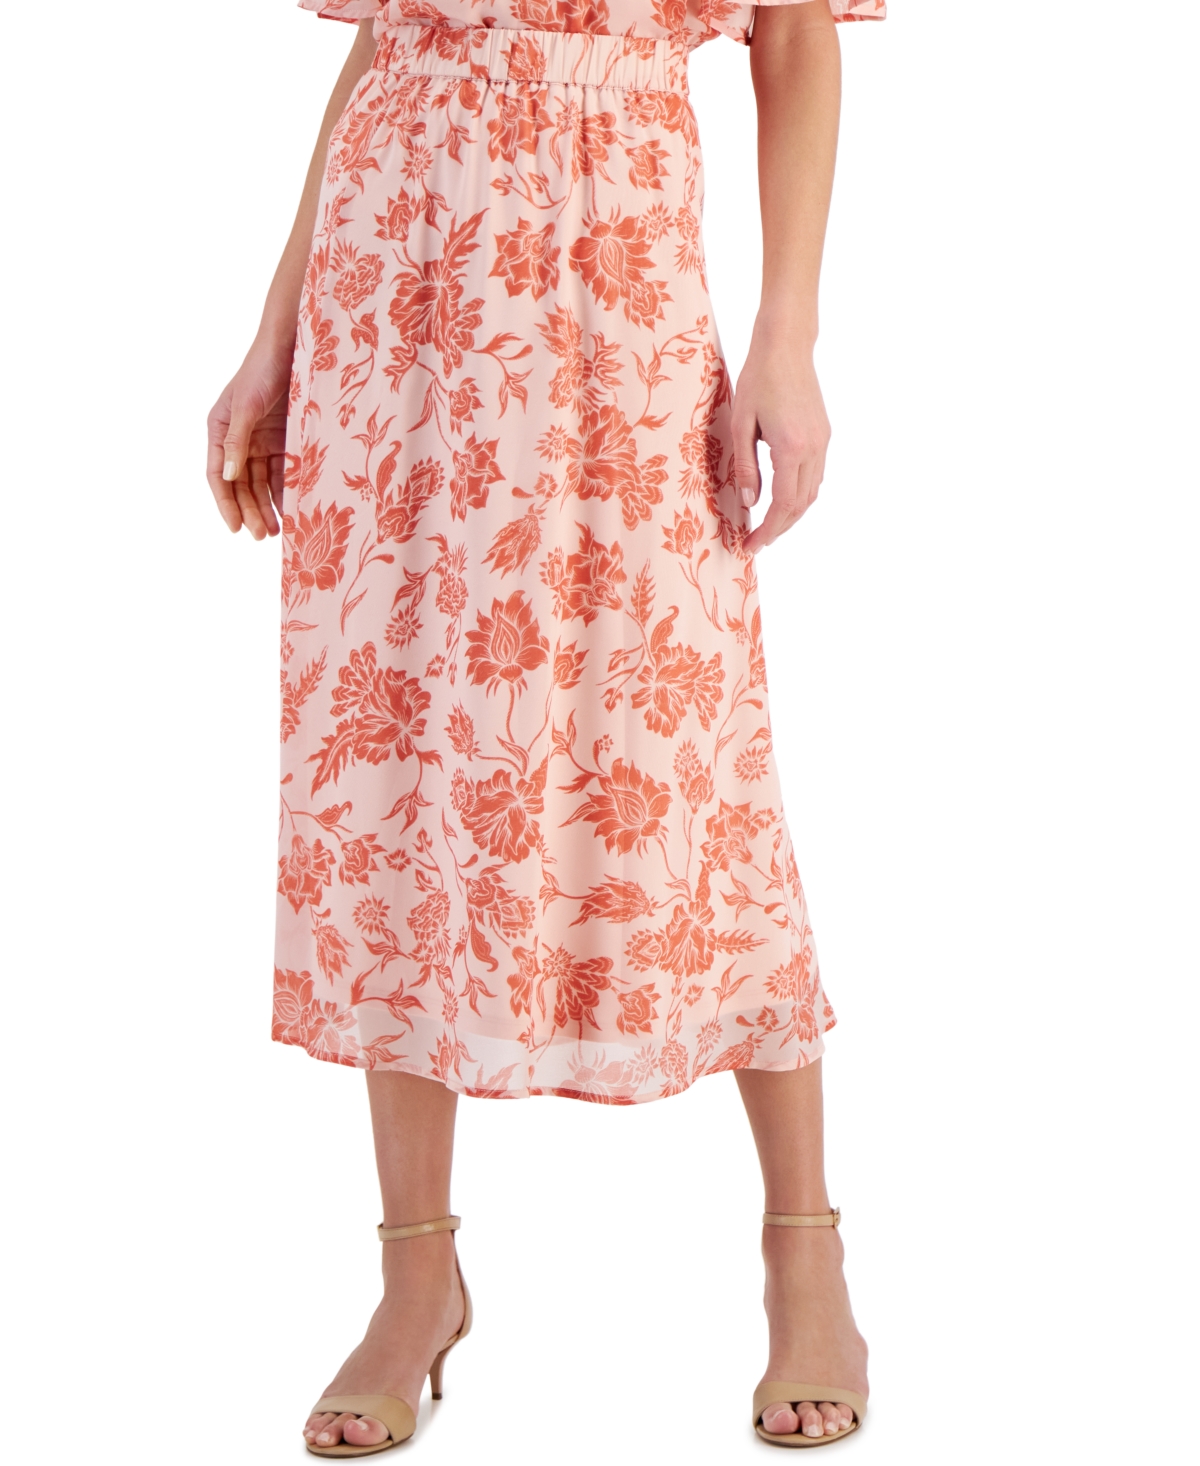 Women's Printed Pull-On Skirt, Created for Macy's - Rose Tint Combo